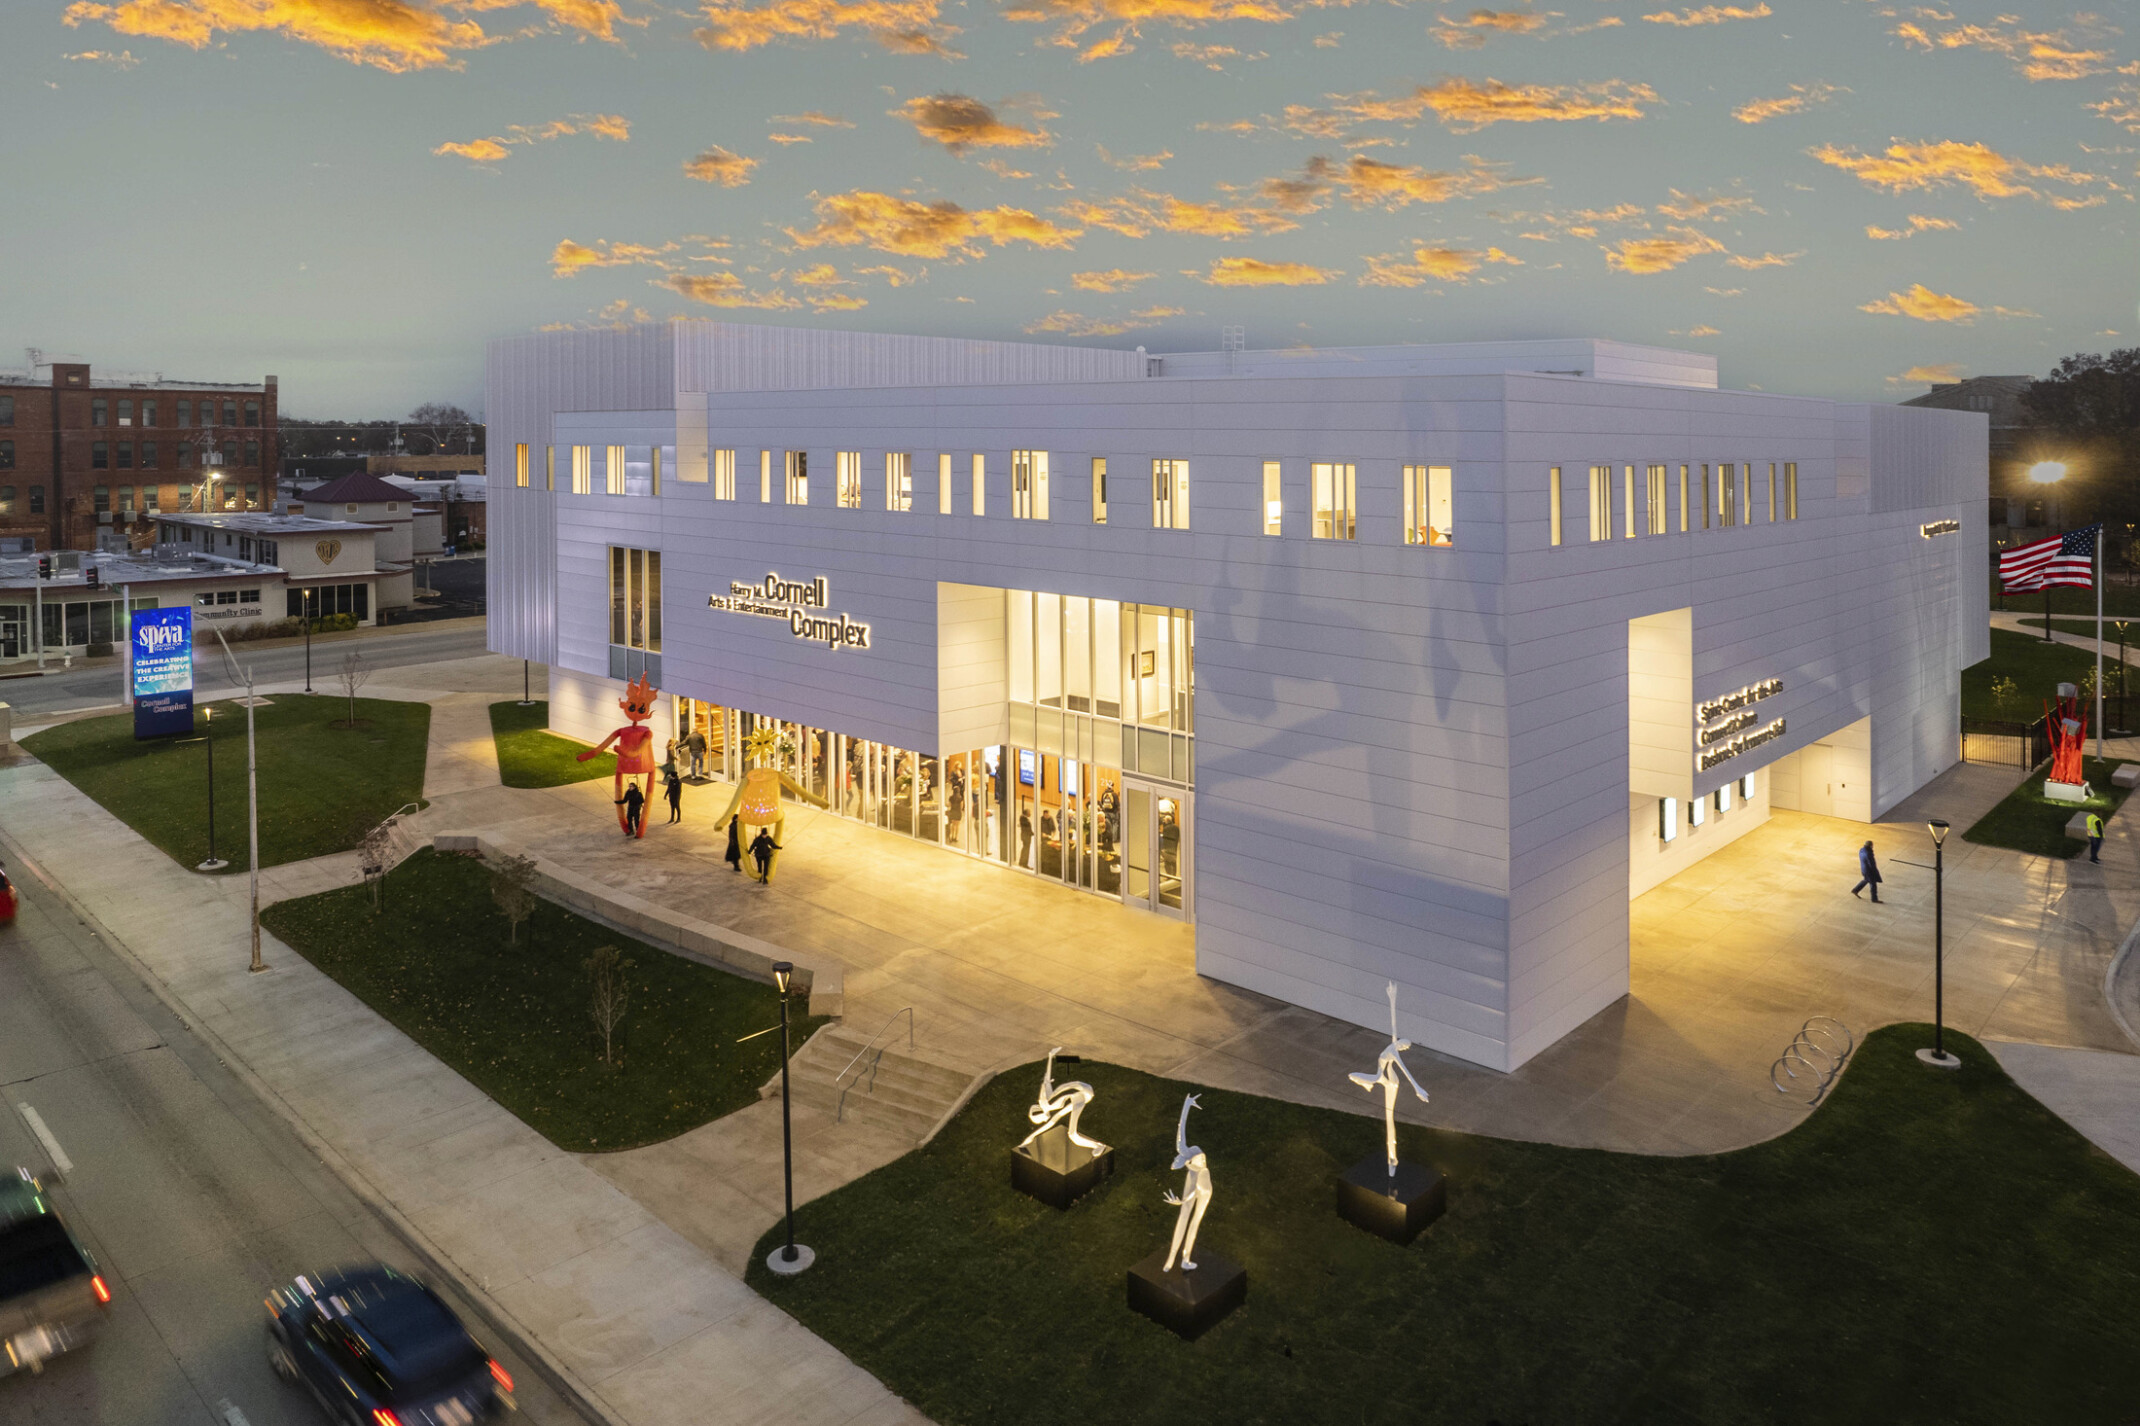 Exterior, night-time view of the new Harry M. Cornell Arts & Entertainment Complex, a white paneled building, sculptures on lawn